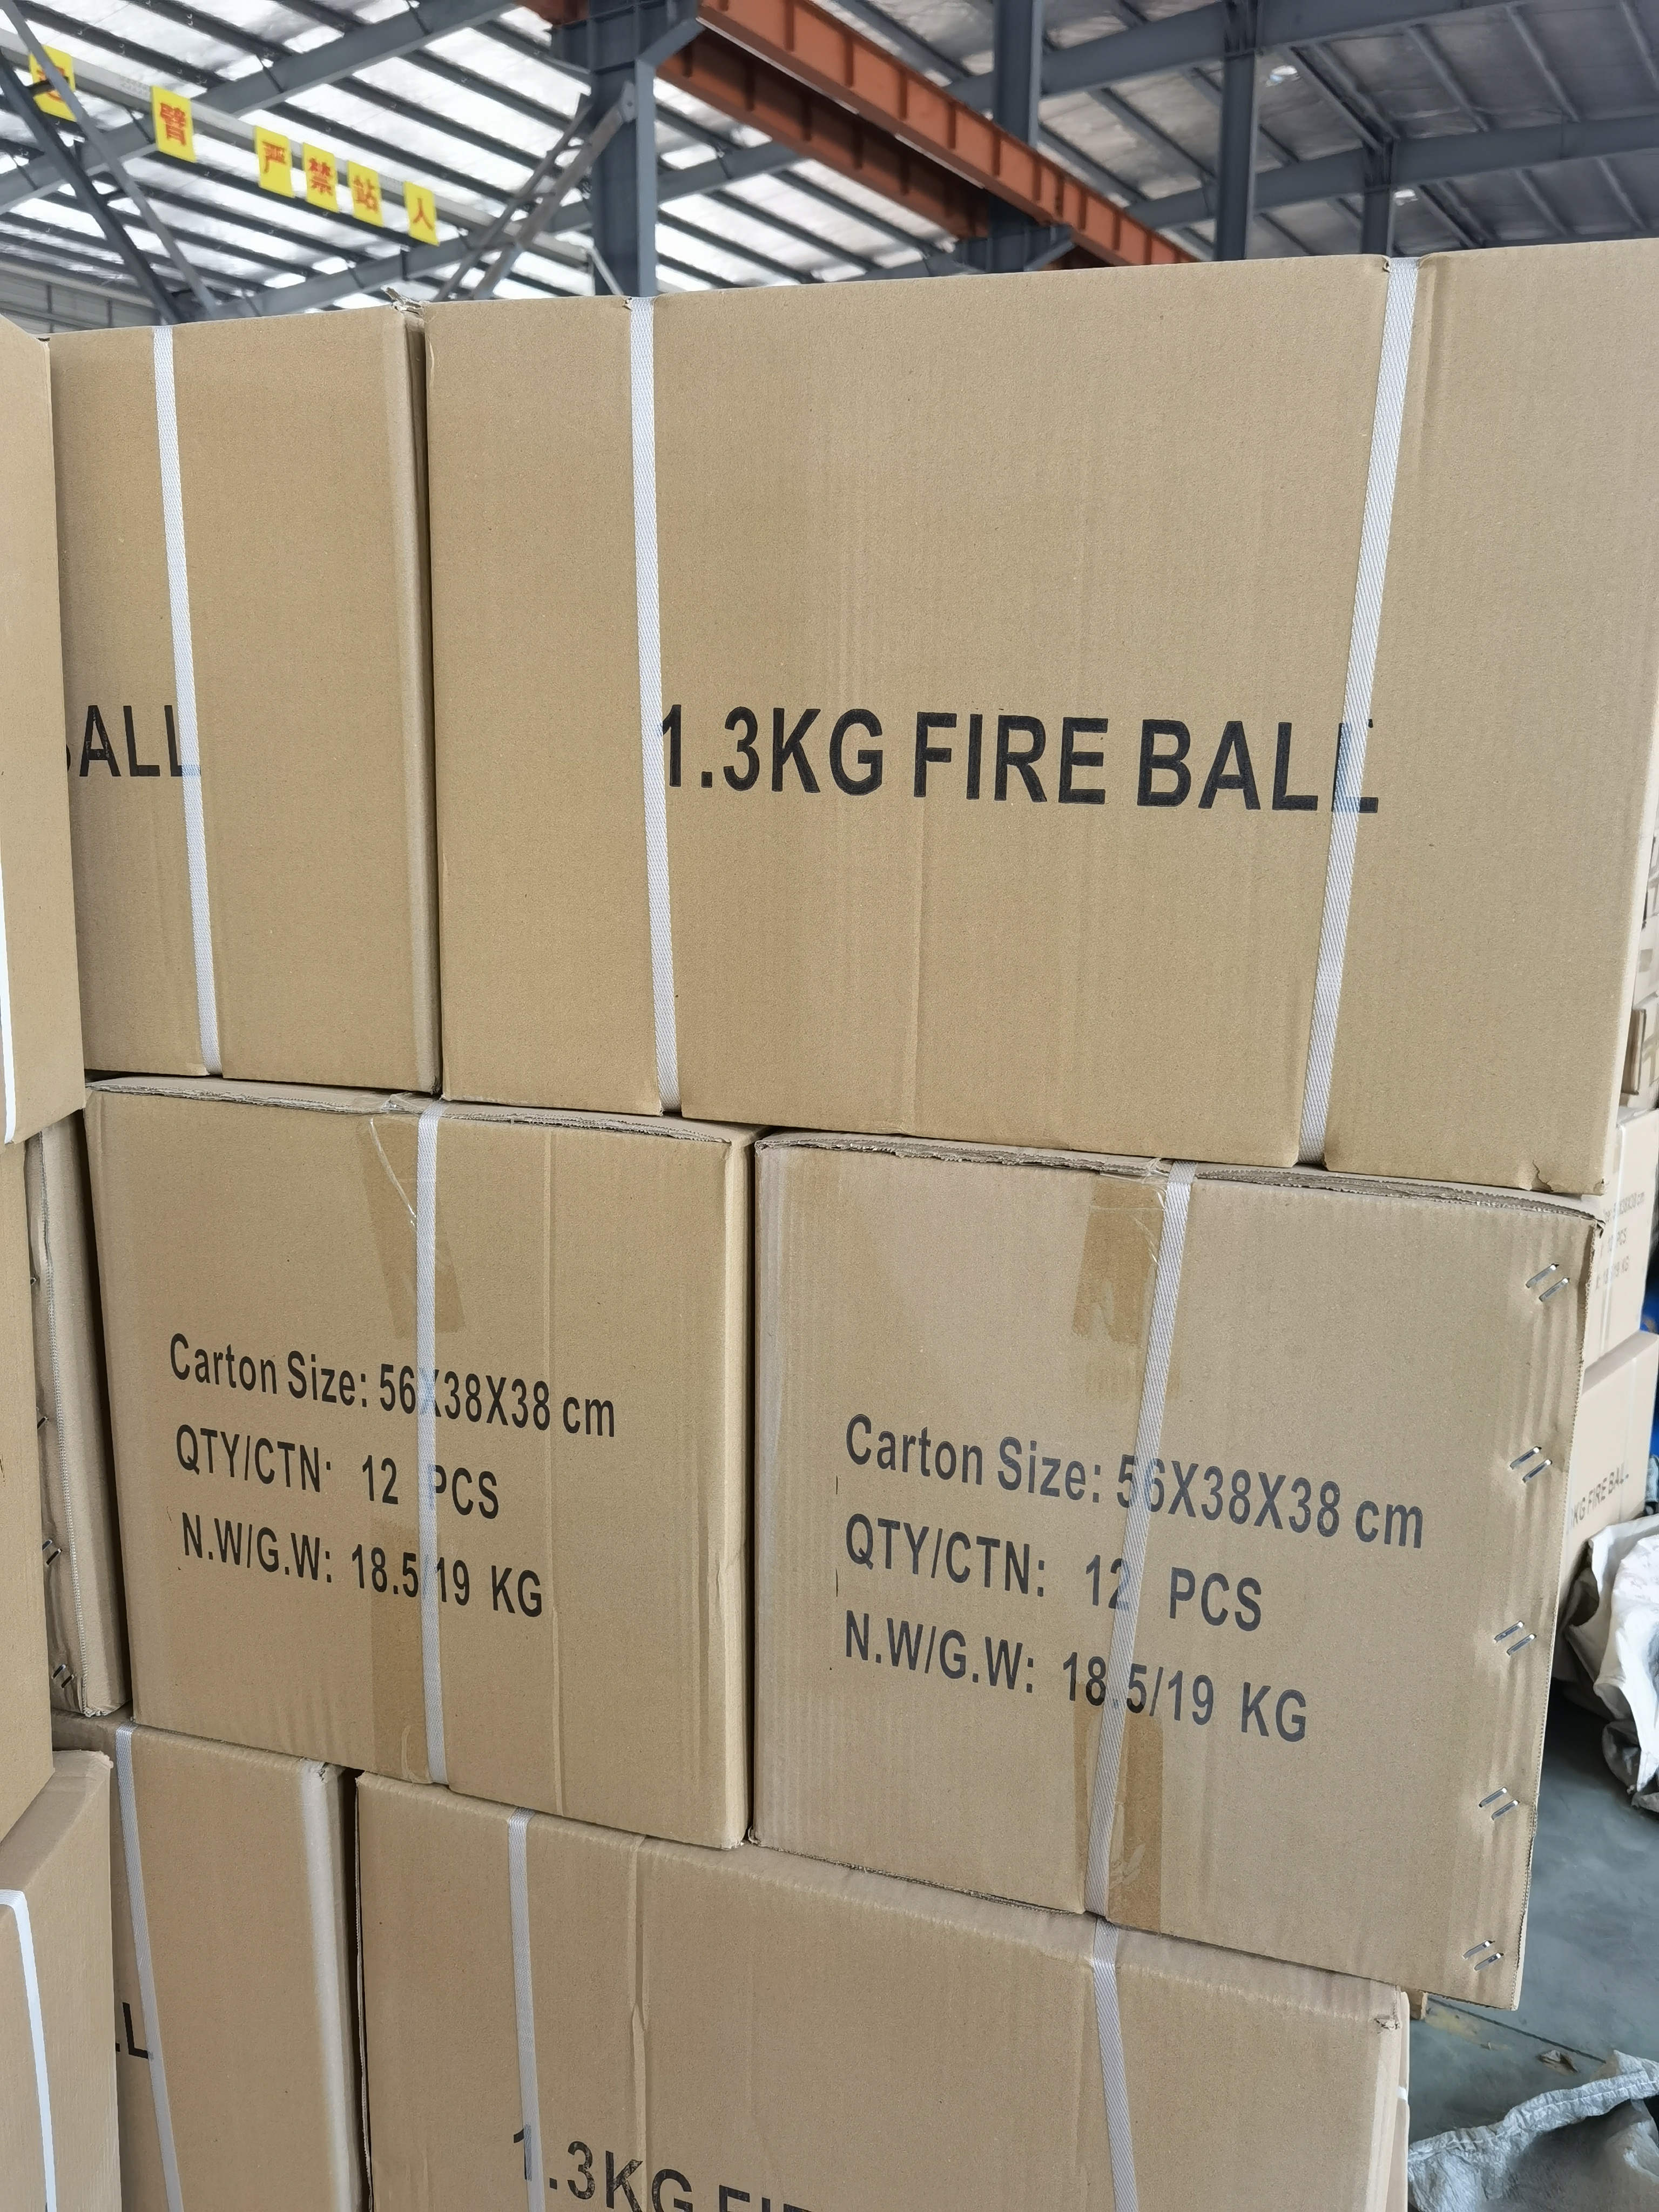 Oem Small Fire Extinguisher Ball For Kitchen